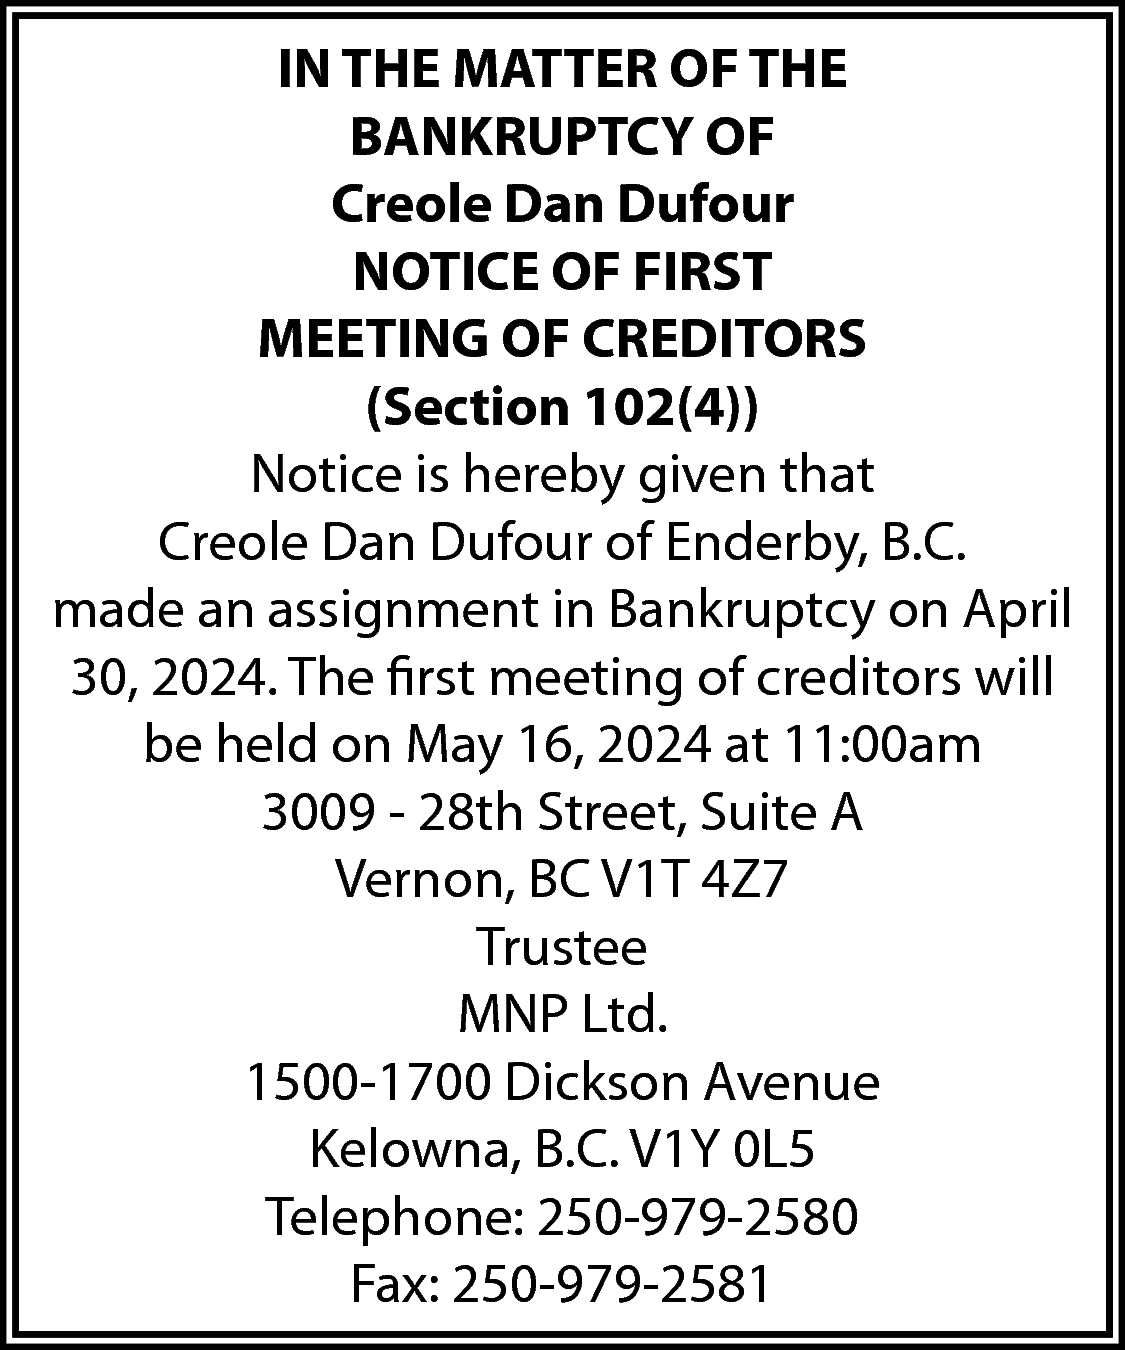 IN THE MATTER OF THE  IN THE MATTER OF THE  BANKRUPTCY OF  Creole Dan Dufour  NOTICE OF FIRST  MEETING OF CREDITORS  (Section 102(4))  Notice is hereby given that  Creole Dan Dufour of Enderby, B.C.  made an assignment in Bankruptcy on April  30, 2024. The first meeting of creditors will  be held on May 16, 2024 at 11:00am  3009 - 28th Street, Suite A  Vernon, BC V1T 4Z7  Trustee  MNP Ltd.  1500-1700 Dickson Avenue  Kelowna, B.C. V1Y 0L5  Telephone: 250-979-2580  Fax: 250-979-2581    